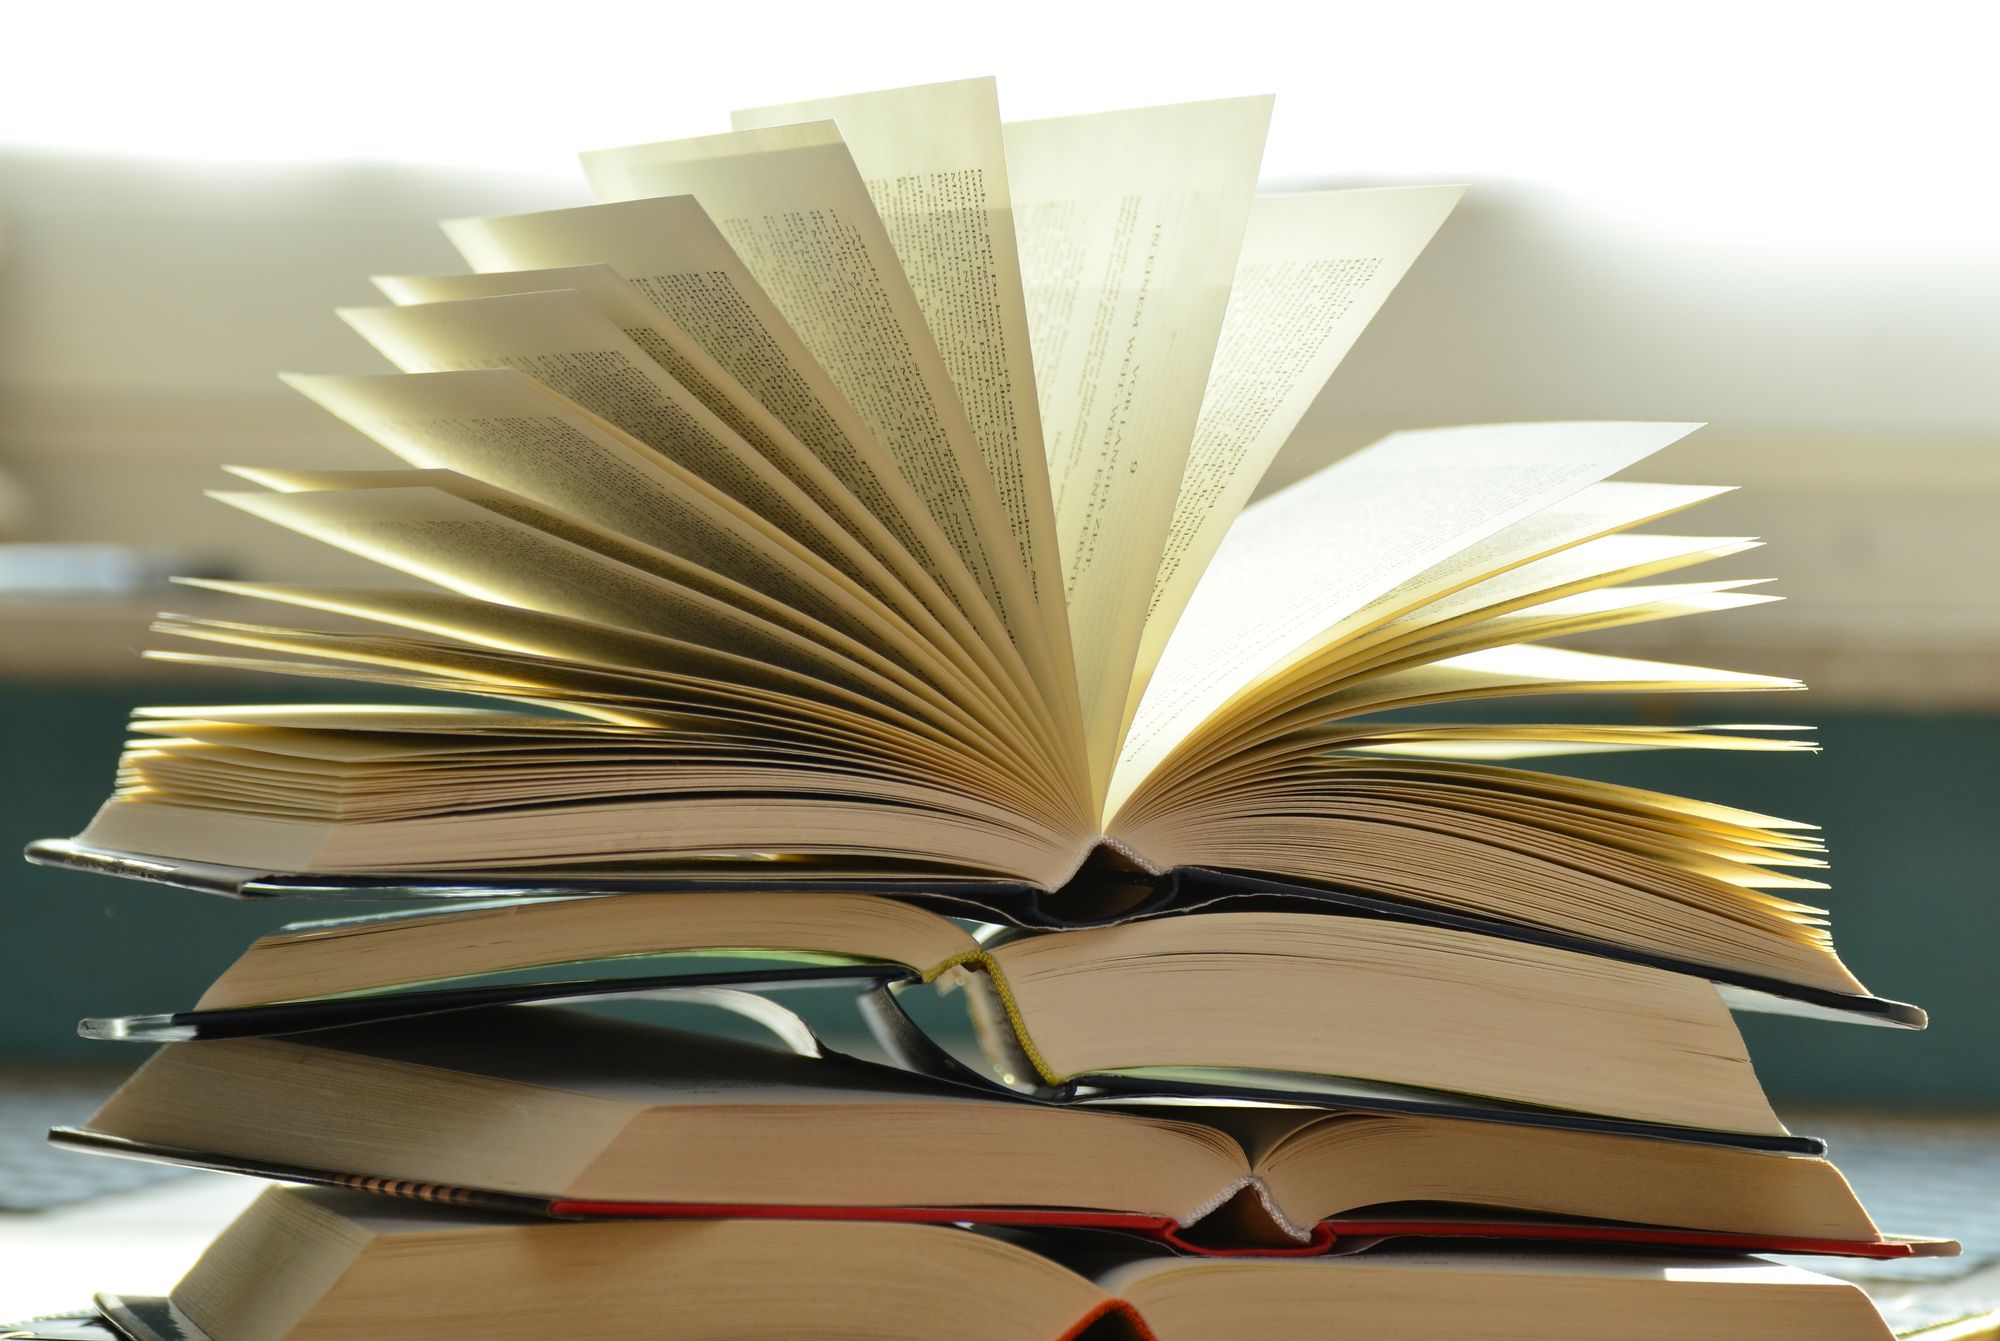 5 excellent Books to get smarter